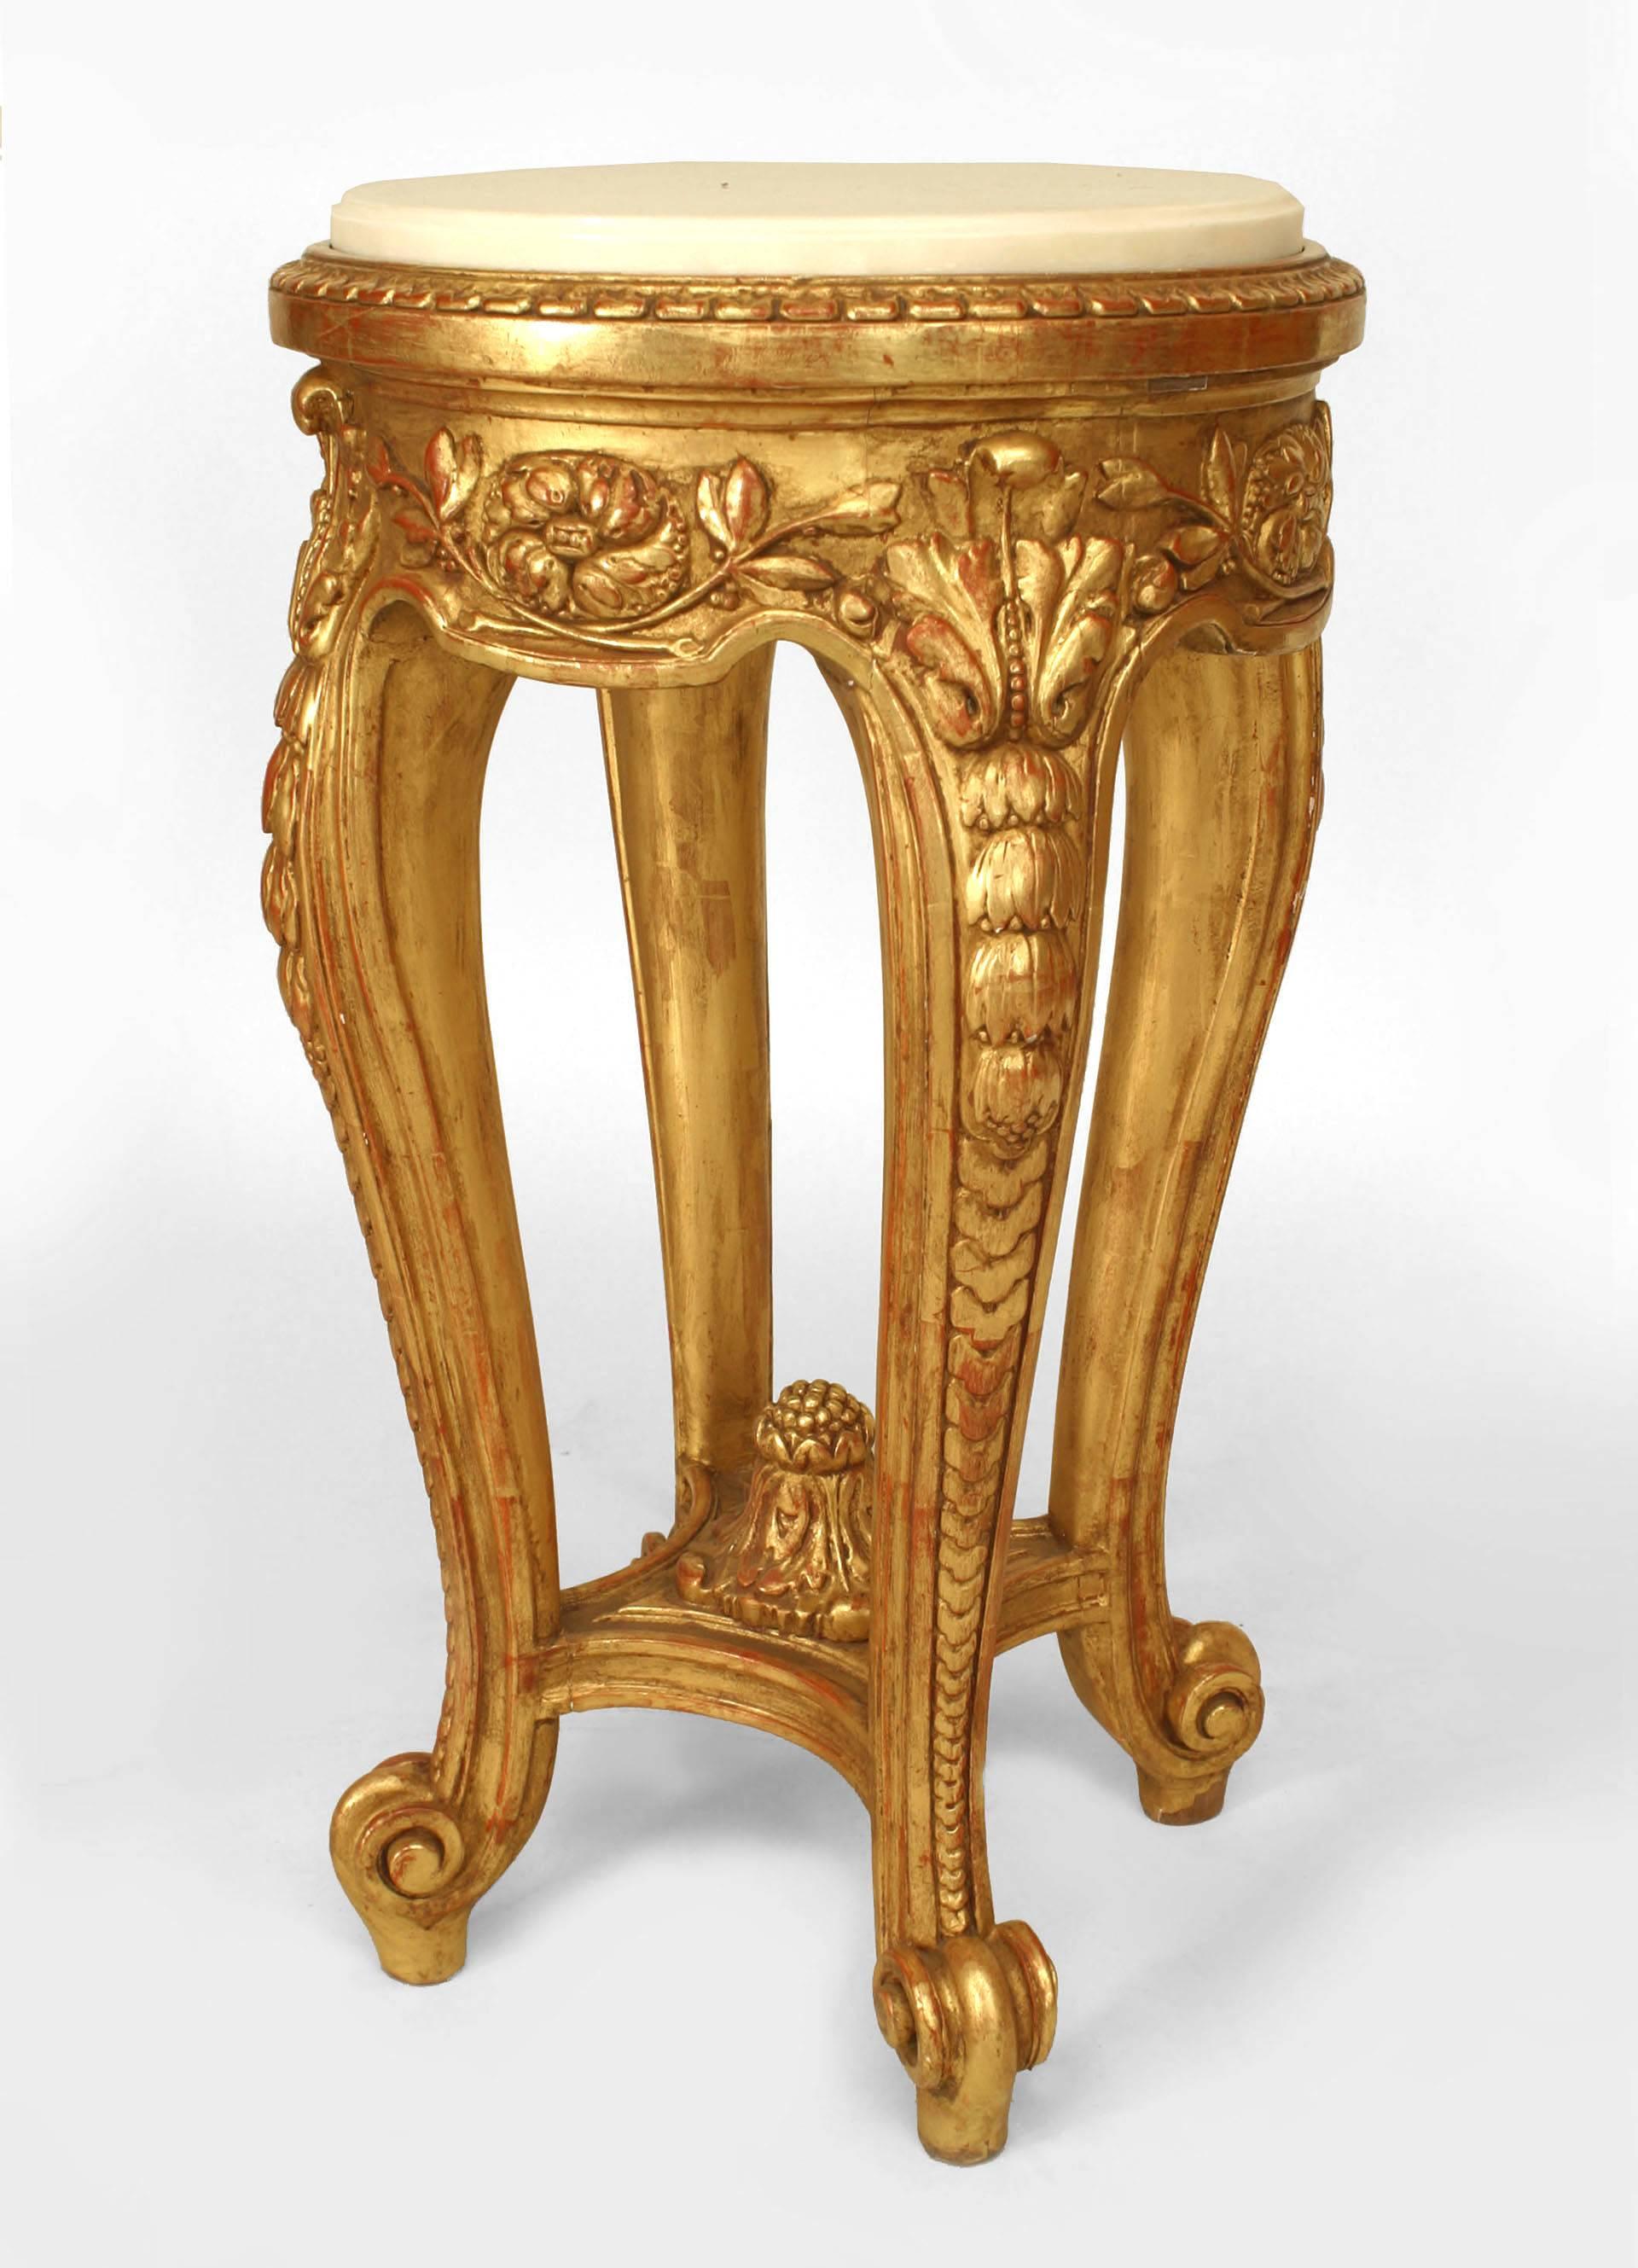 Pair of French Regence-style (19th Century) gilt and carved end tables with stretcher and round white marble tops.
